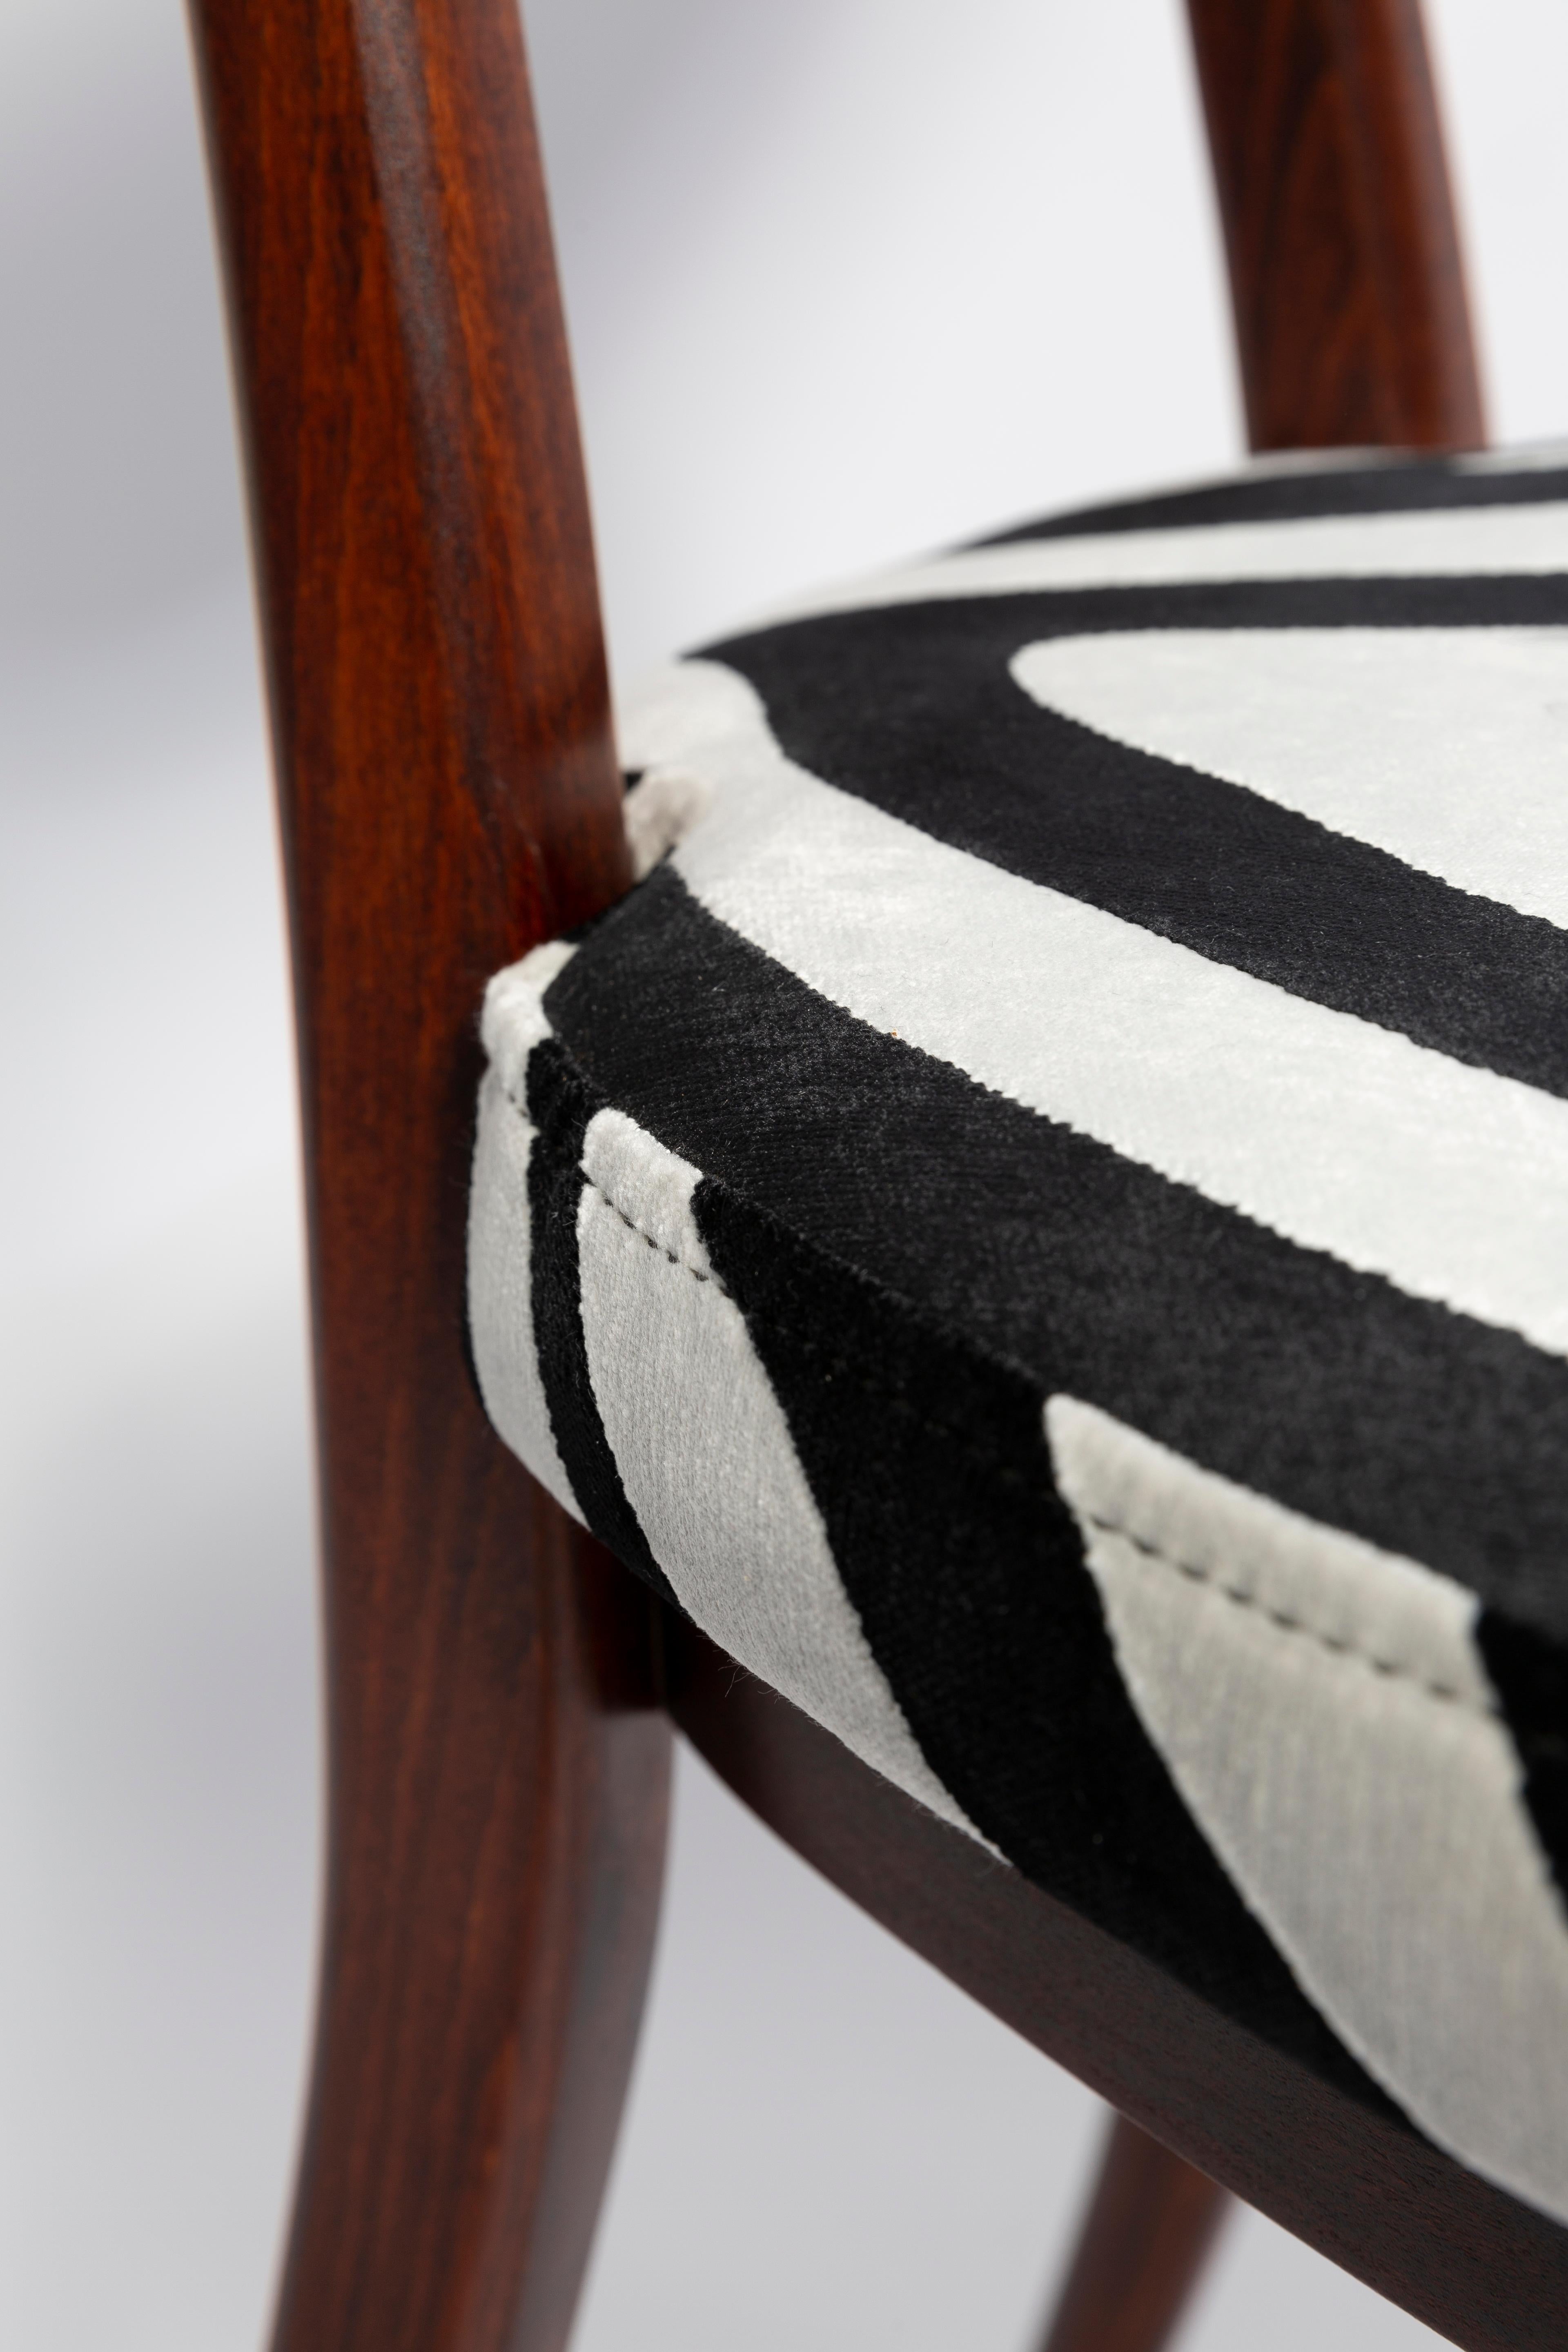 Hand-Crafted Midcentury Regency Zebra Black and White Heart Chair, Poland, 1960s For Sale